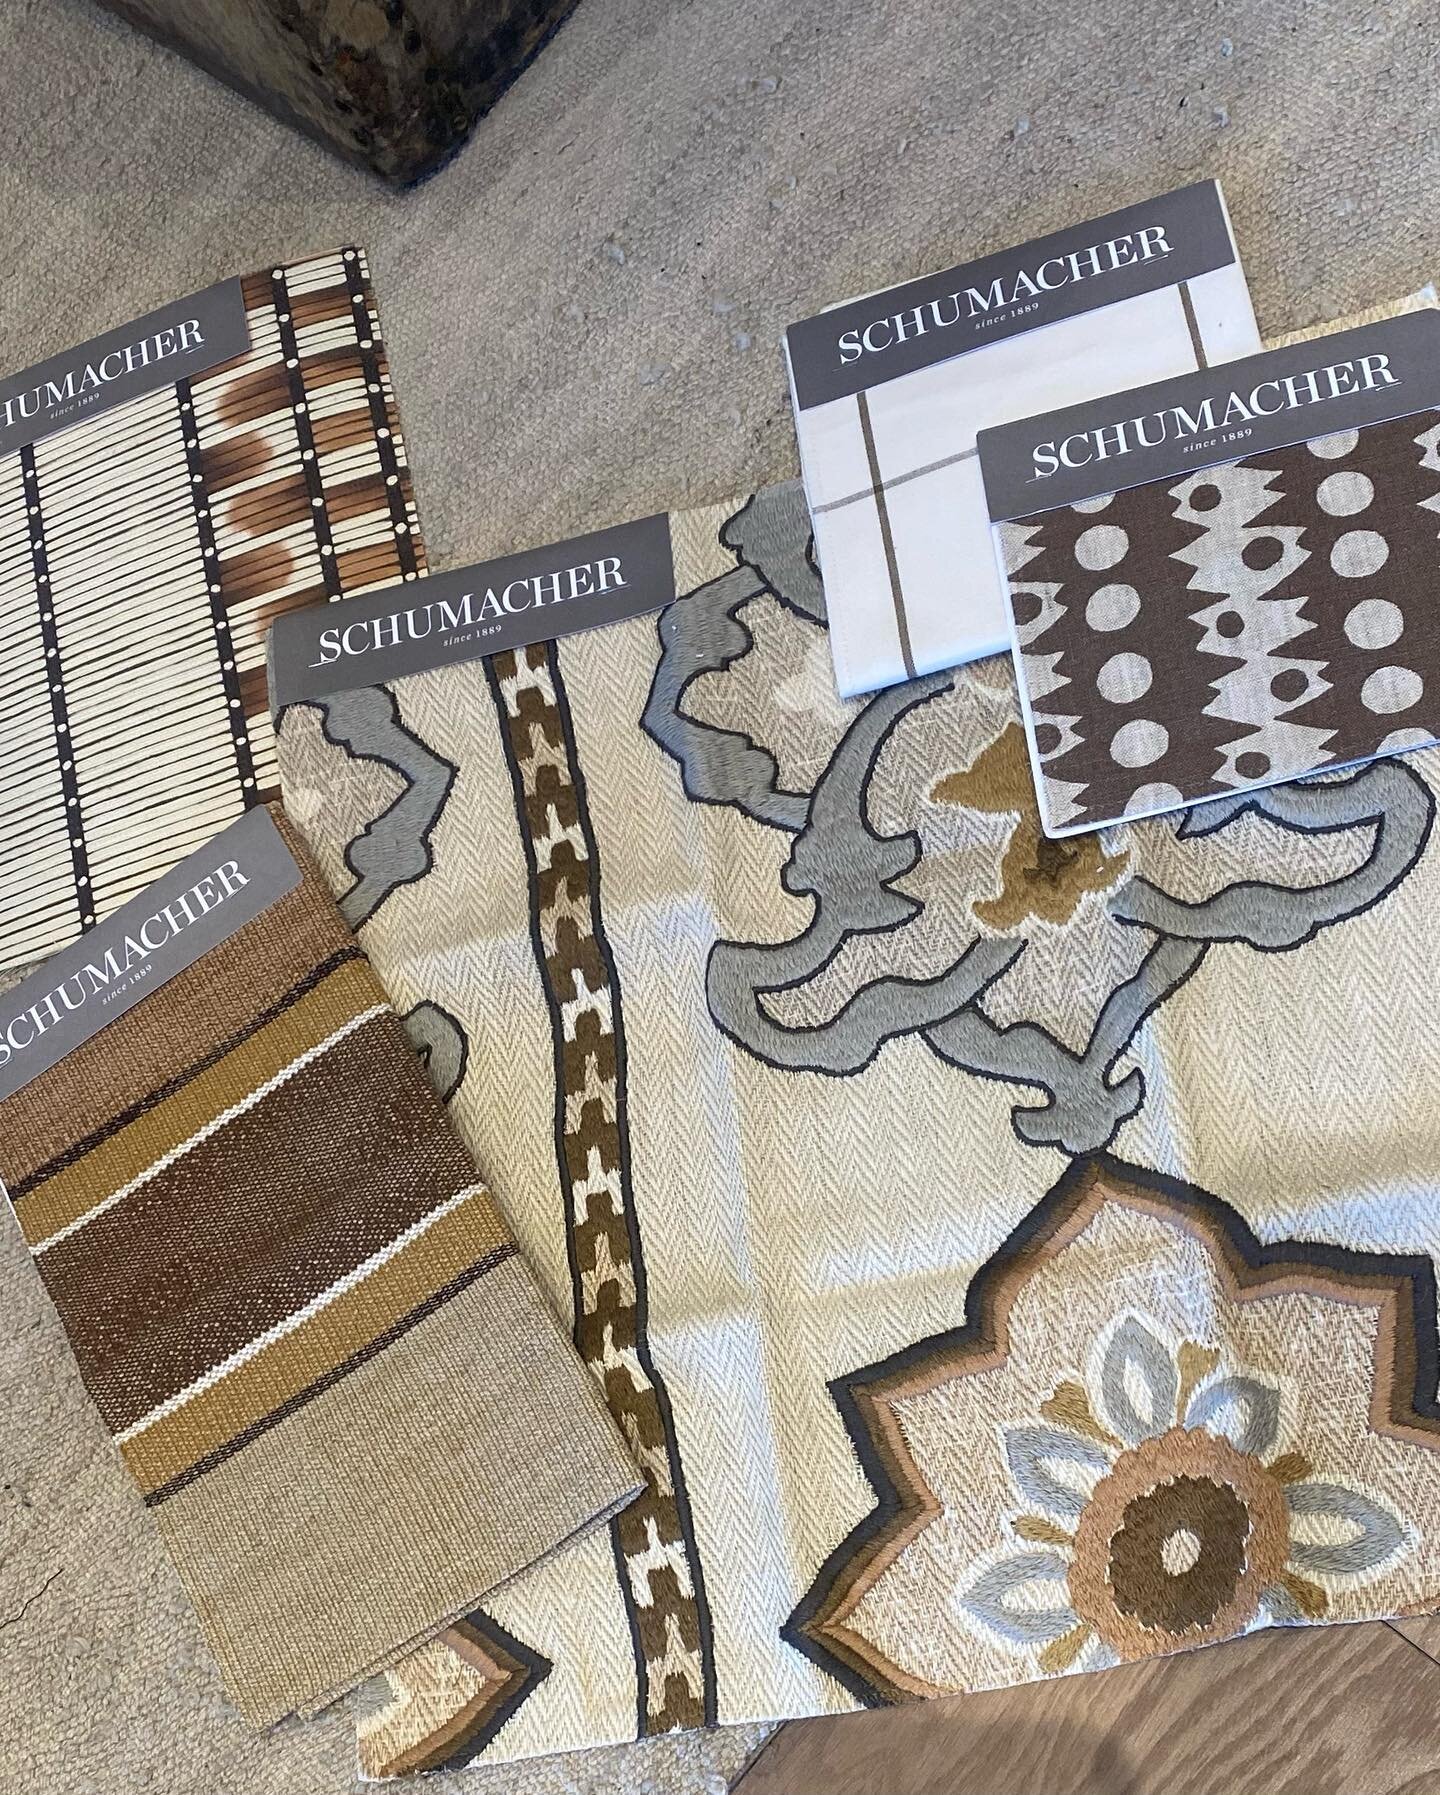 Highlights from our Schumacher studio meeting! 🤍
We love when our vendors present new collections and colorways to inspire upcoming projects!
.
.
.
#interiordesign #schumacher #newcollections #interiorphilosophy #interiorphilosophyatl #atlantadesign